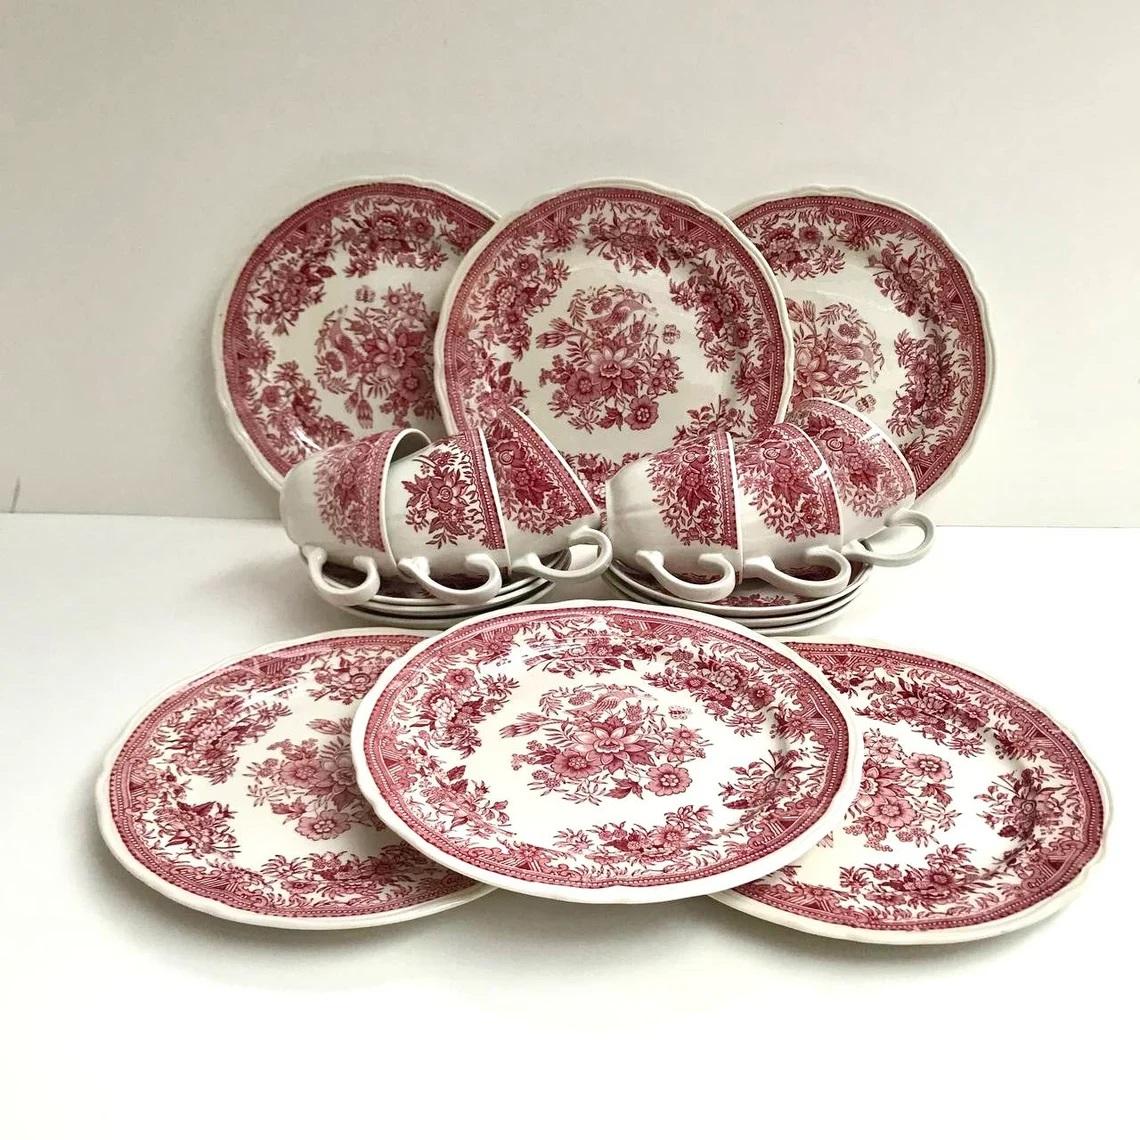 Villeroy and Boch Tea set from Red Fasan Series.

Vintage Red and White Porcelain Tea Set of 6.

In excellent condition, no chips, cracks or crazing.

Includes:

1. Tea Pairs - 6 pcs.

2. Dinner Plates - 6 pcs.

Total: - 18 pcs

Volume